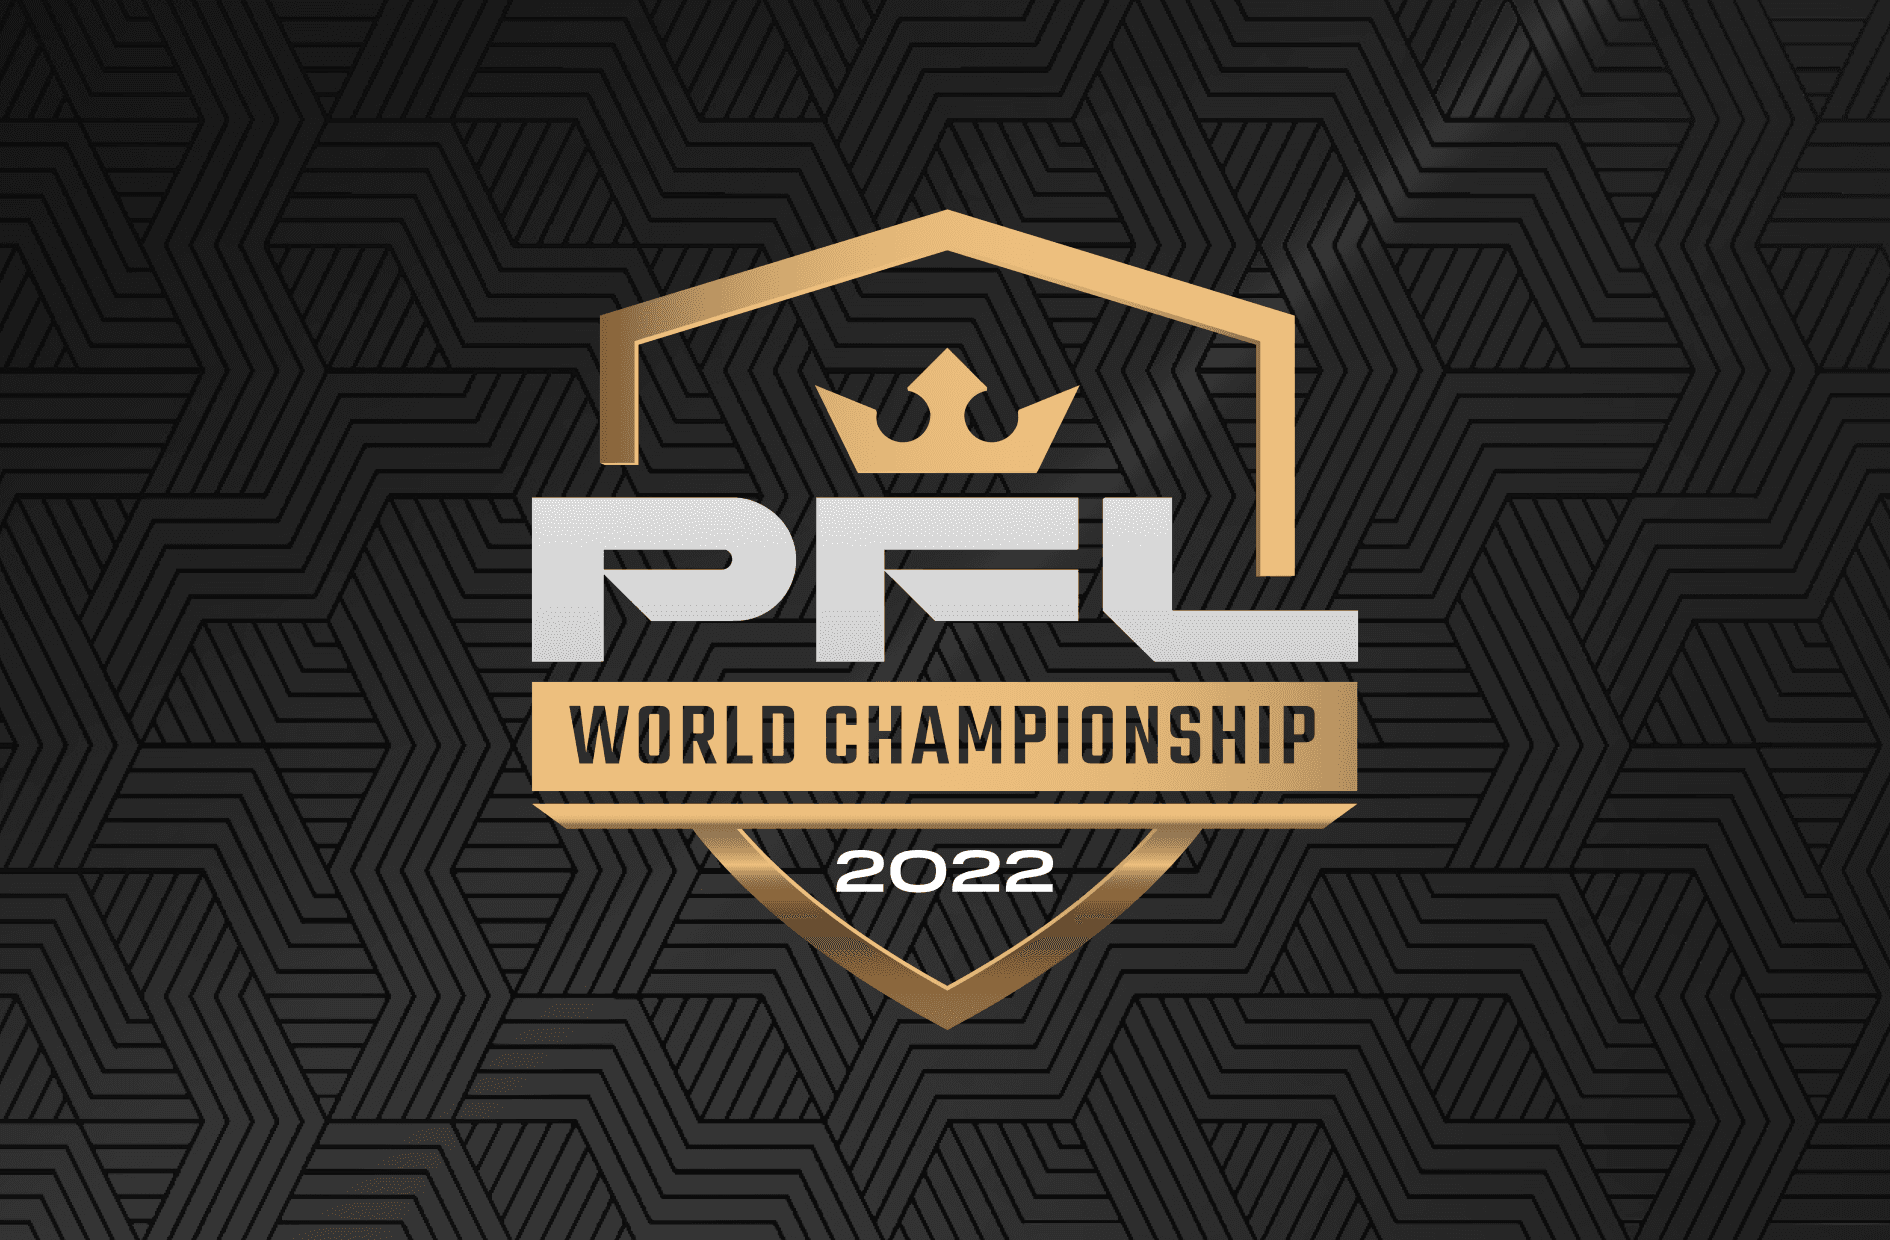 The PFL Sponsors $1,000 for a featured Tournament